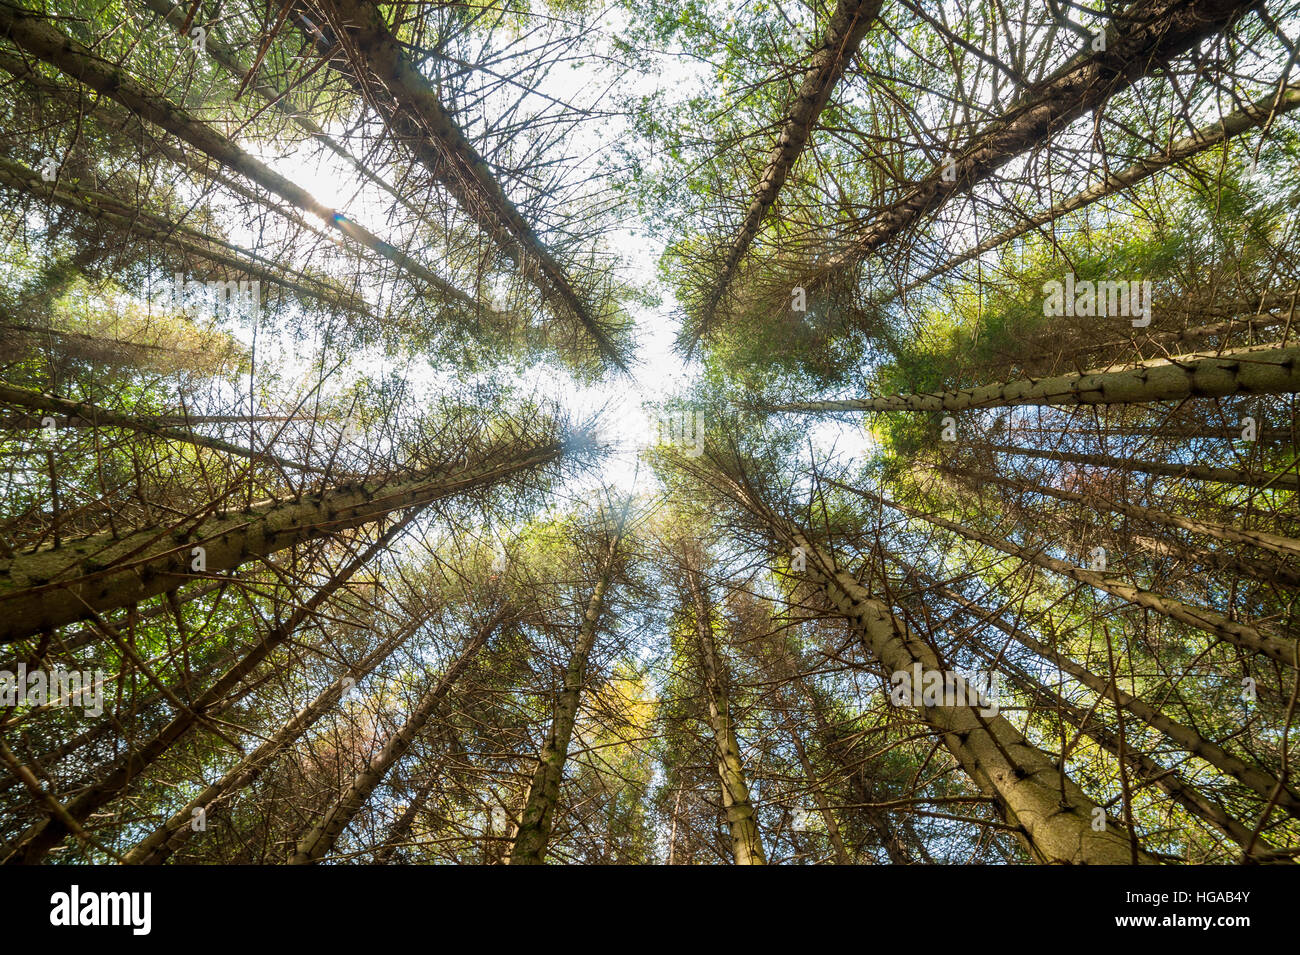 View of of tall pine tree forest a common type of coniferous resinous trees viewed from below Stock Photo